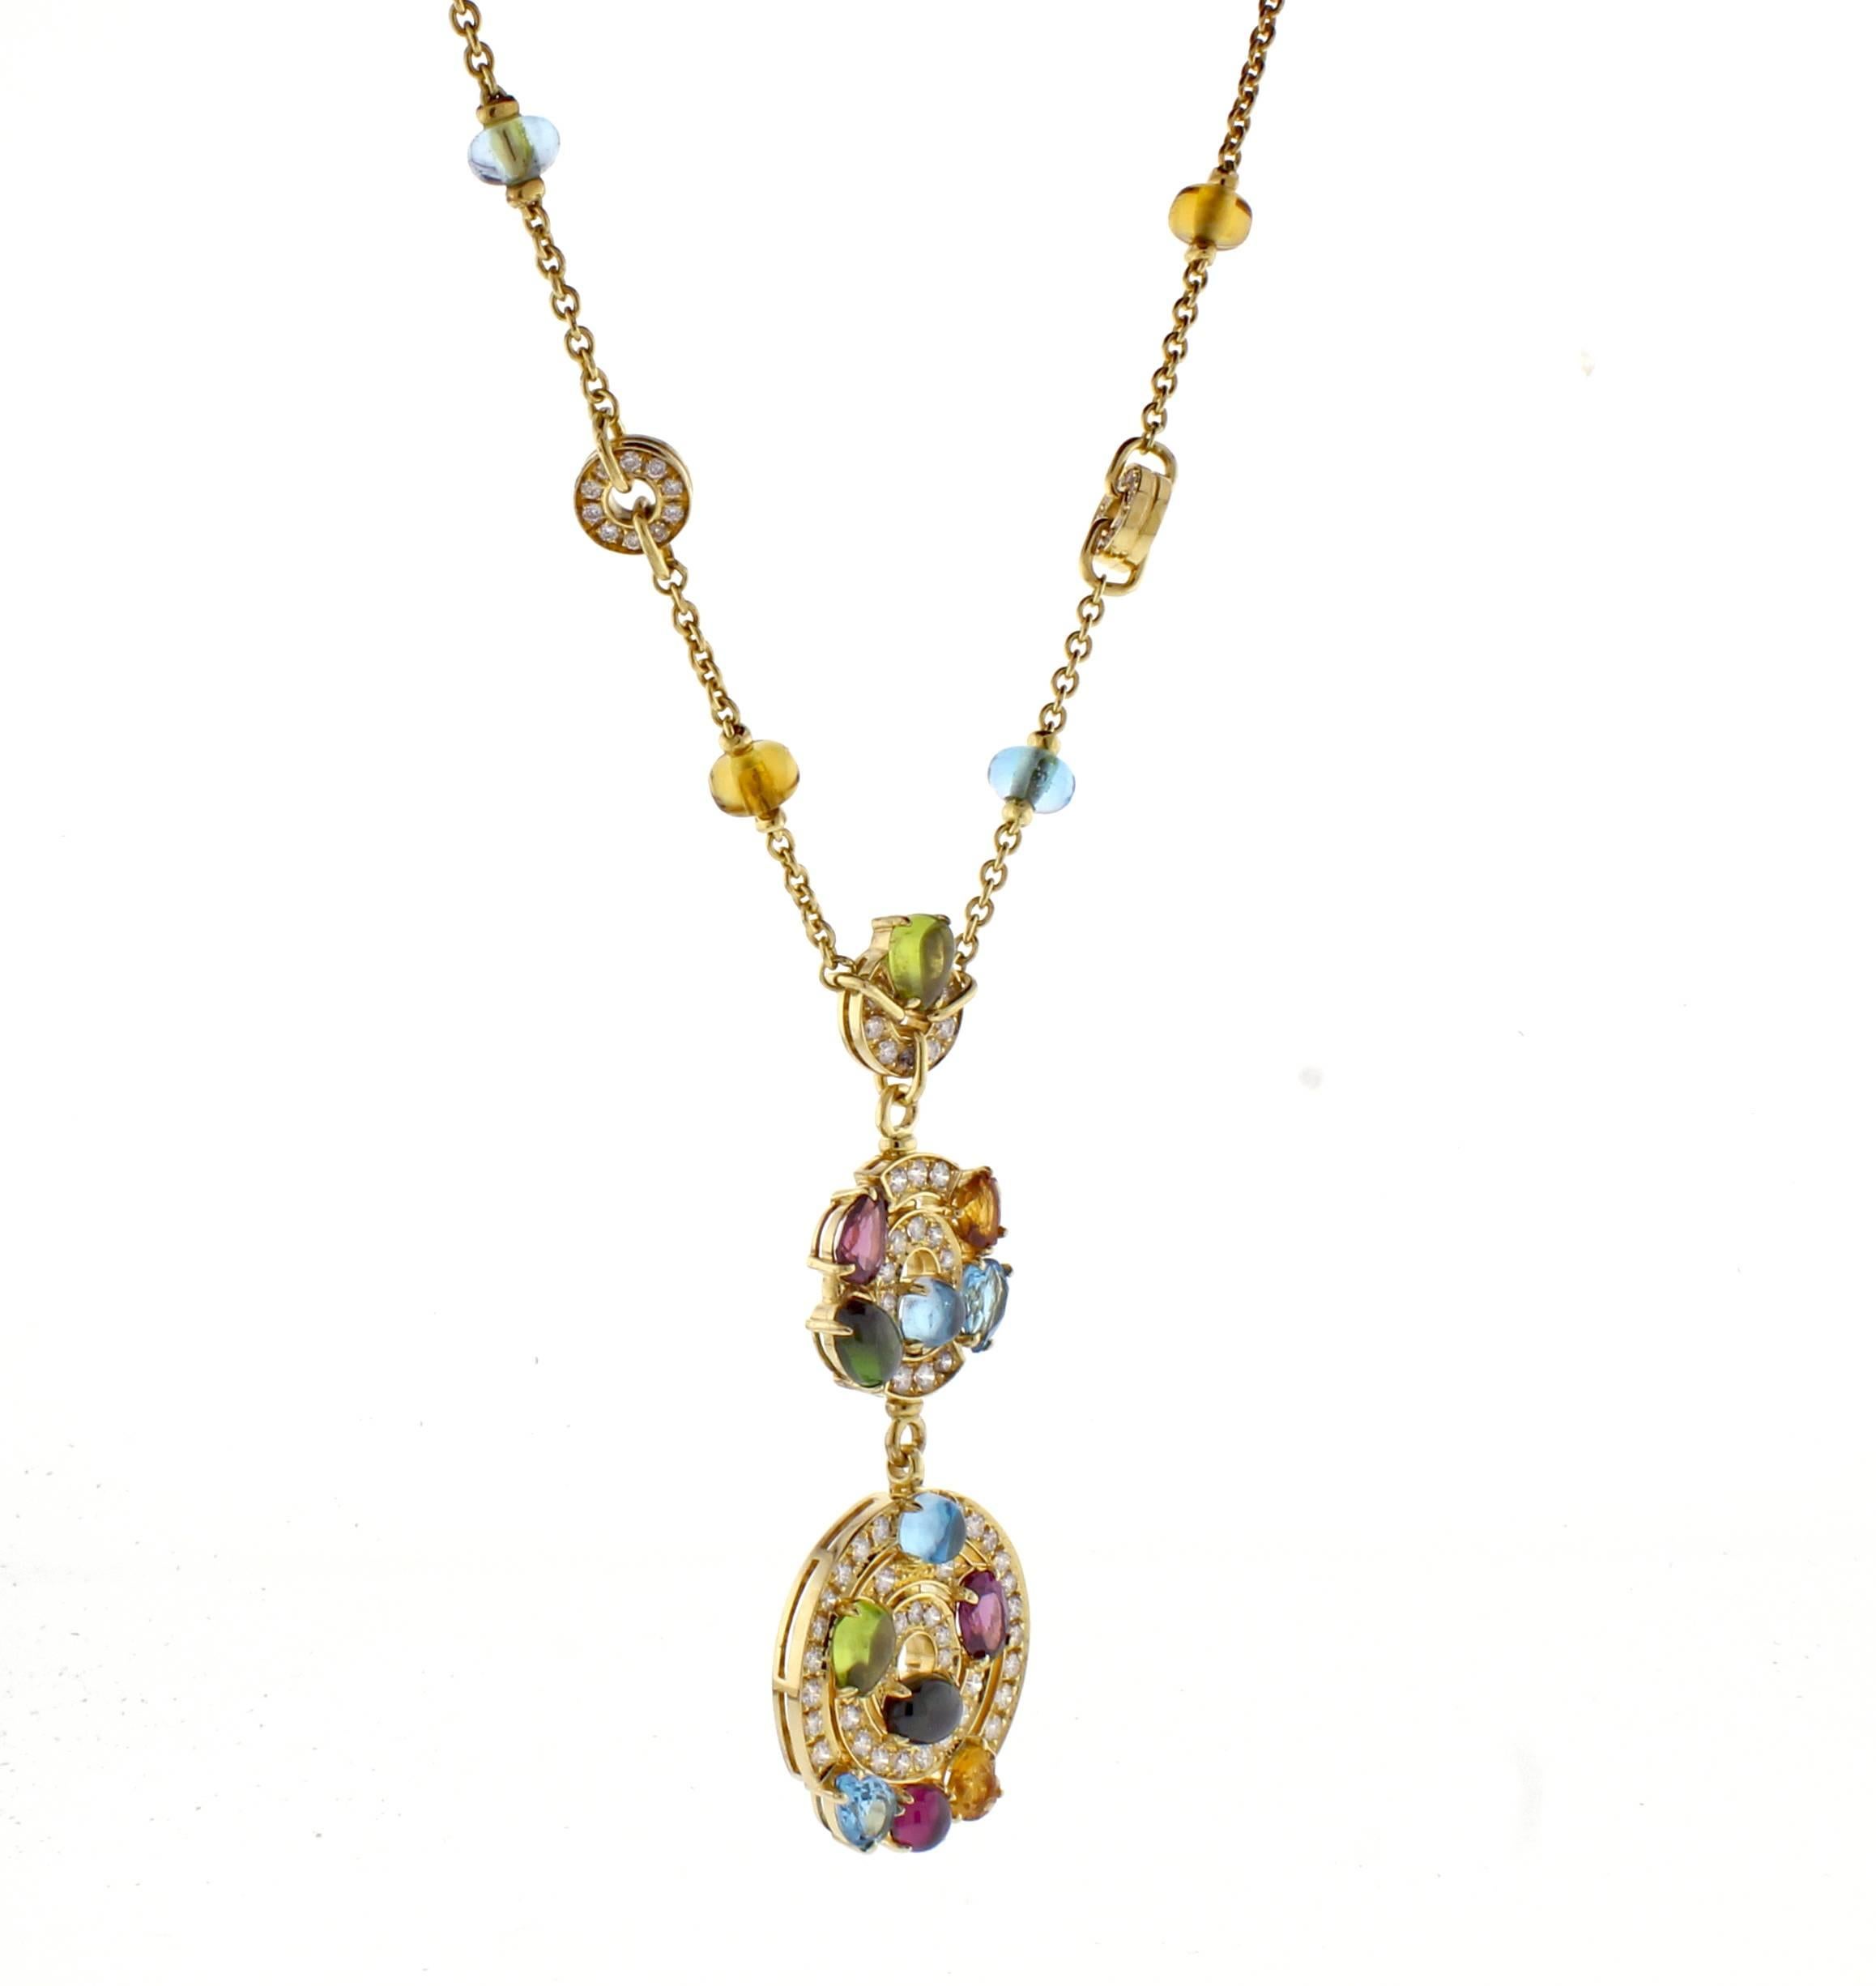 Bulgari  Astral gold necklace with pendant from Concentrica collection, 116 diamonds weigh approximately 2.75 carats. Highlighted with  blue topaz, tourmaline, citrine and peridot.  The larger circle measure 1 inch in diameter with the smaller